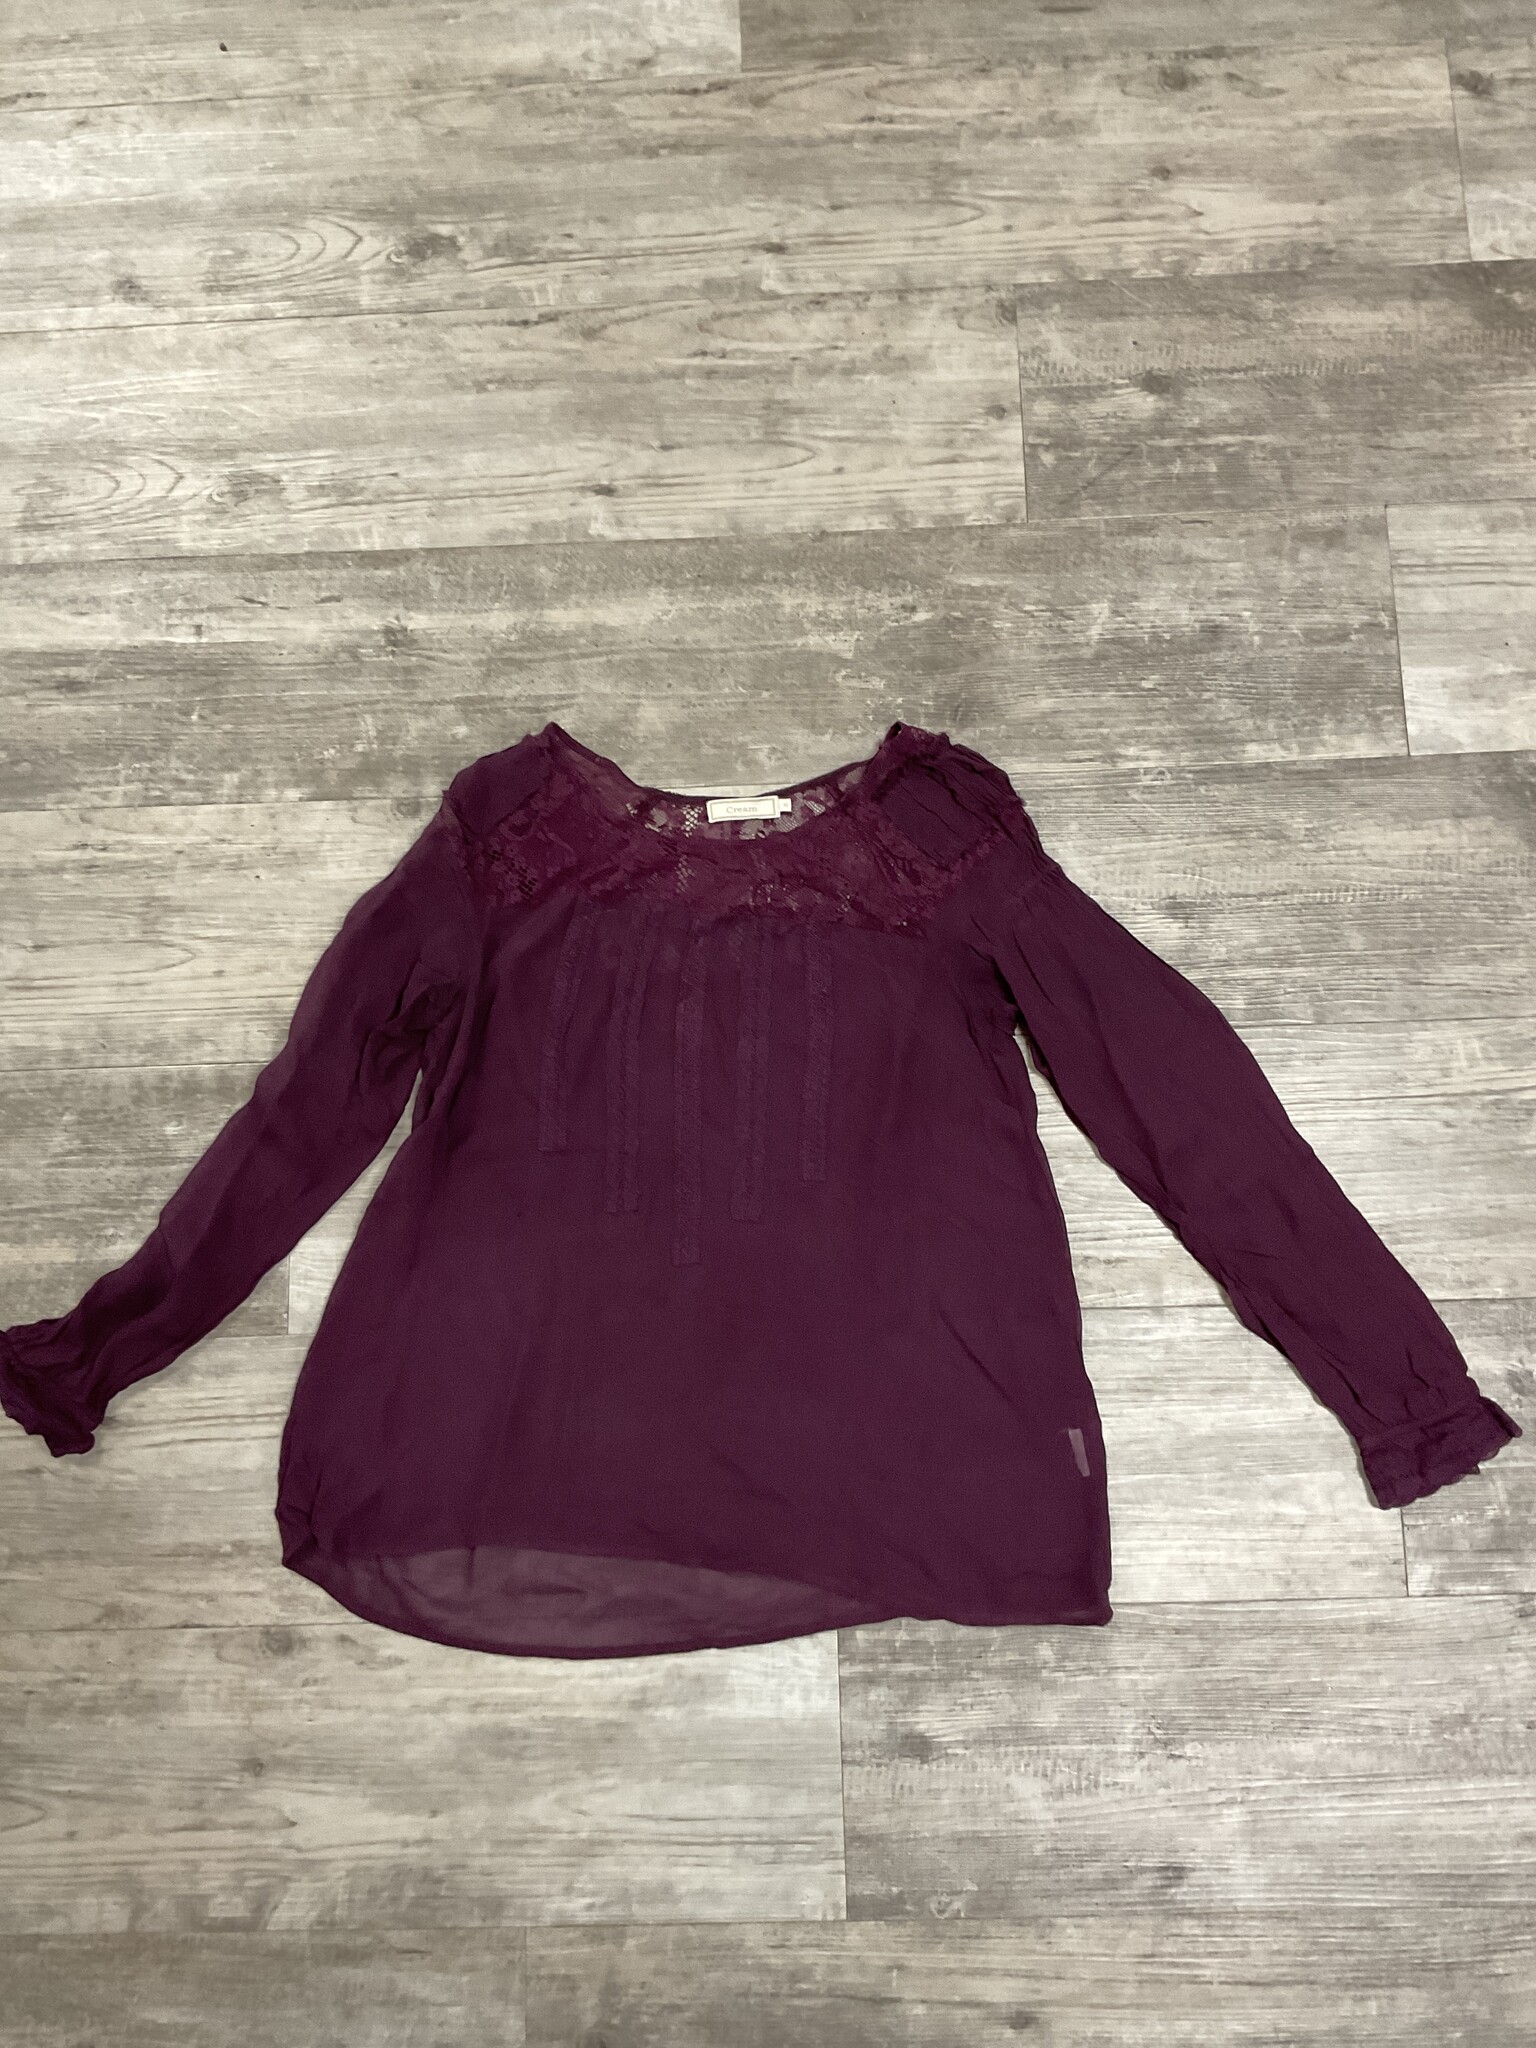 Burgundy Lace Top - Size 40